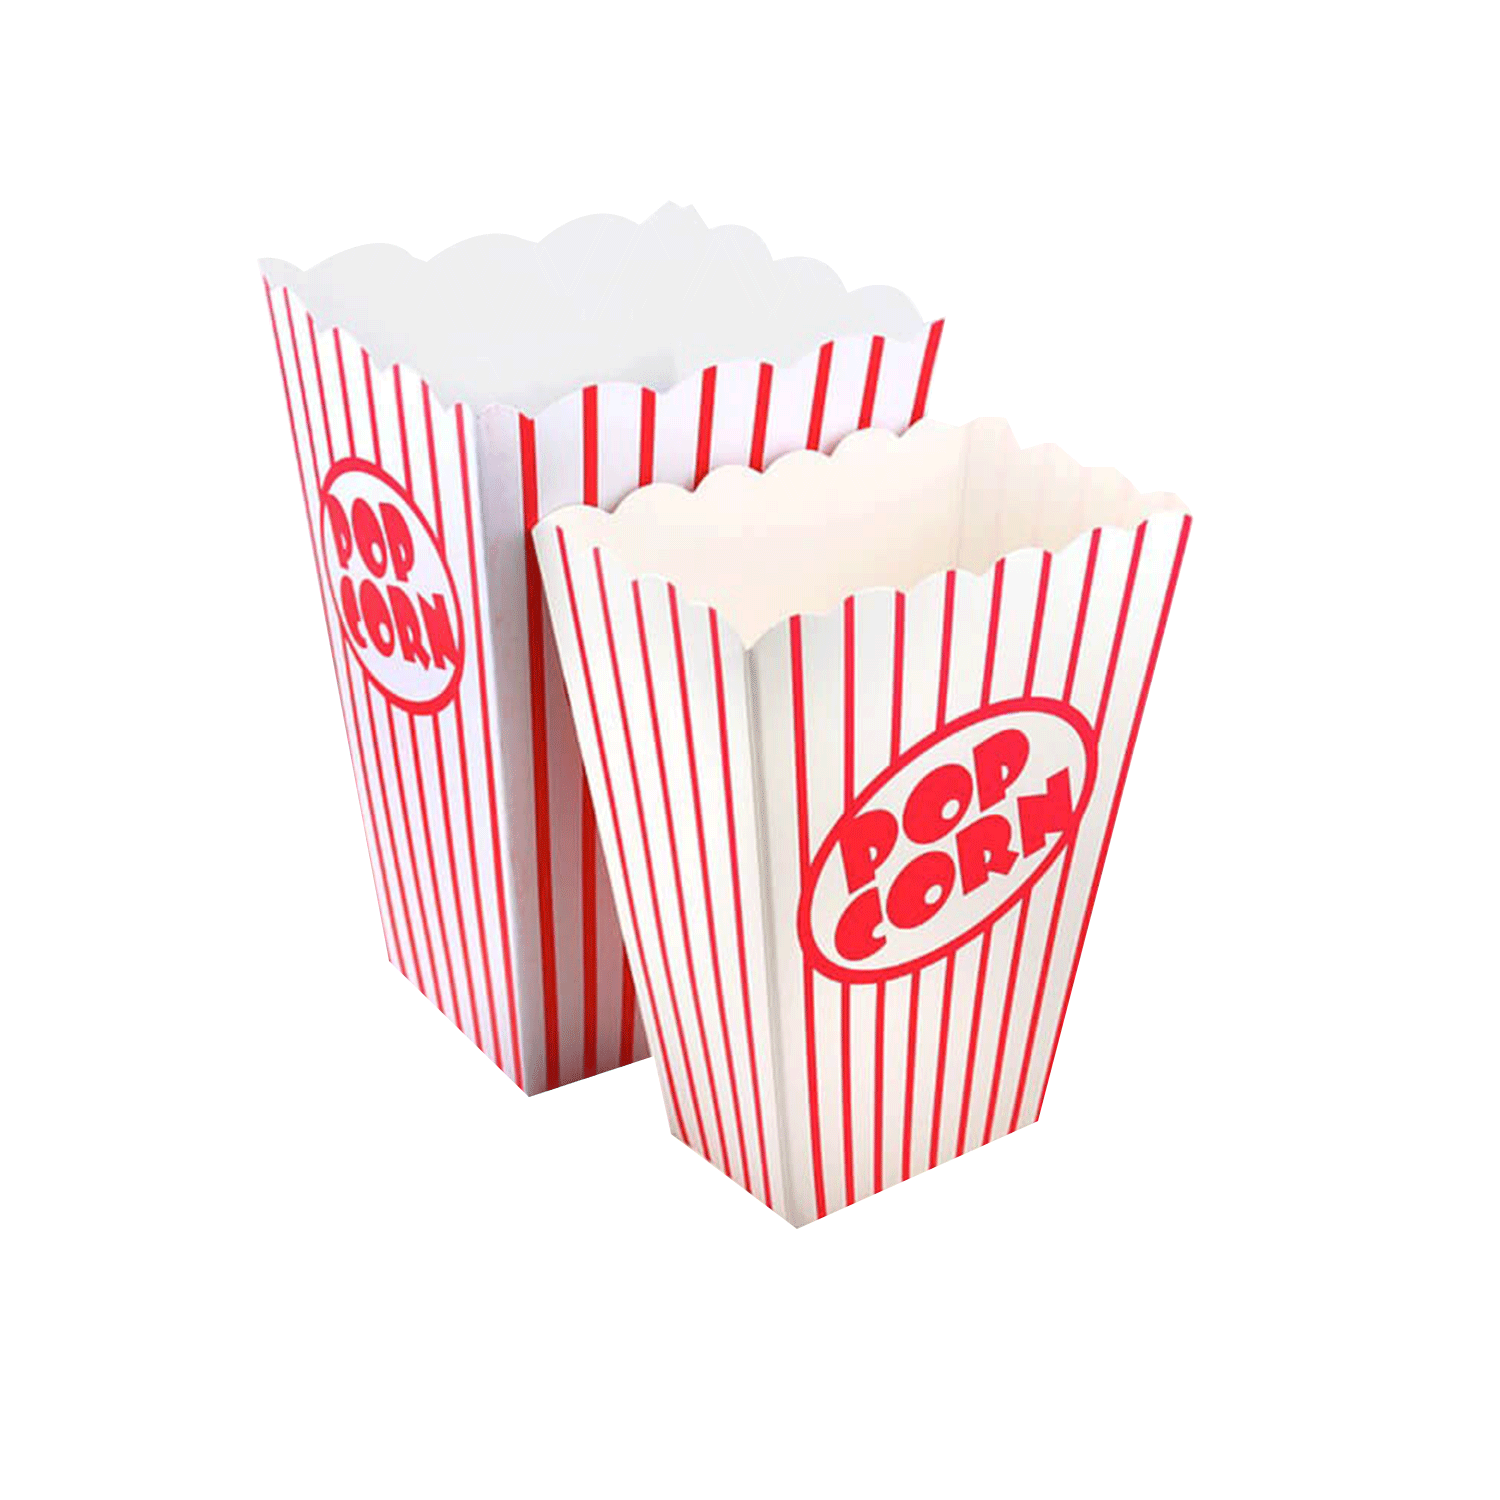 Popcorn packaging boxes